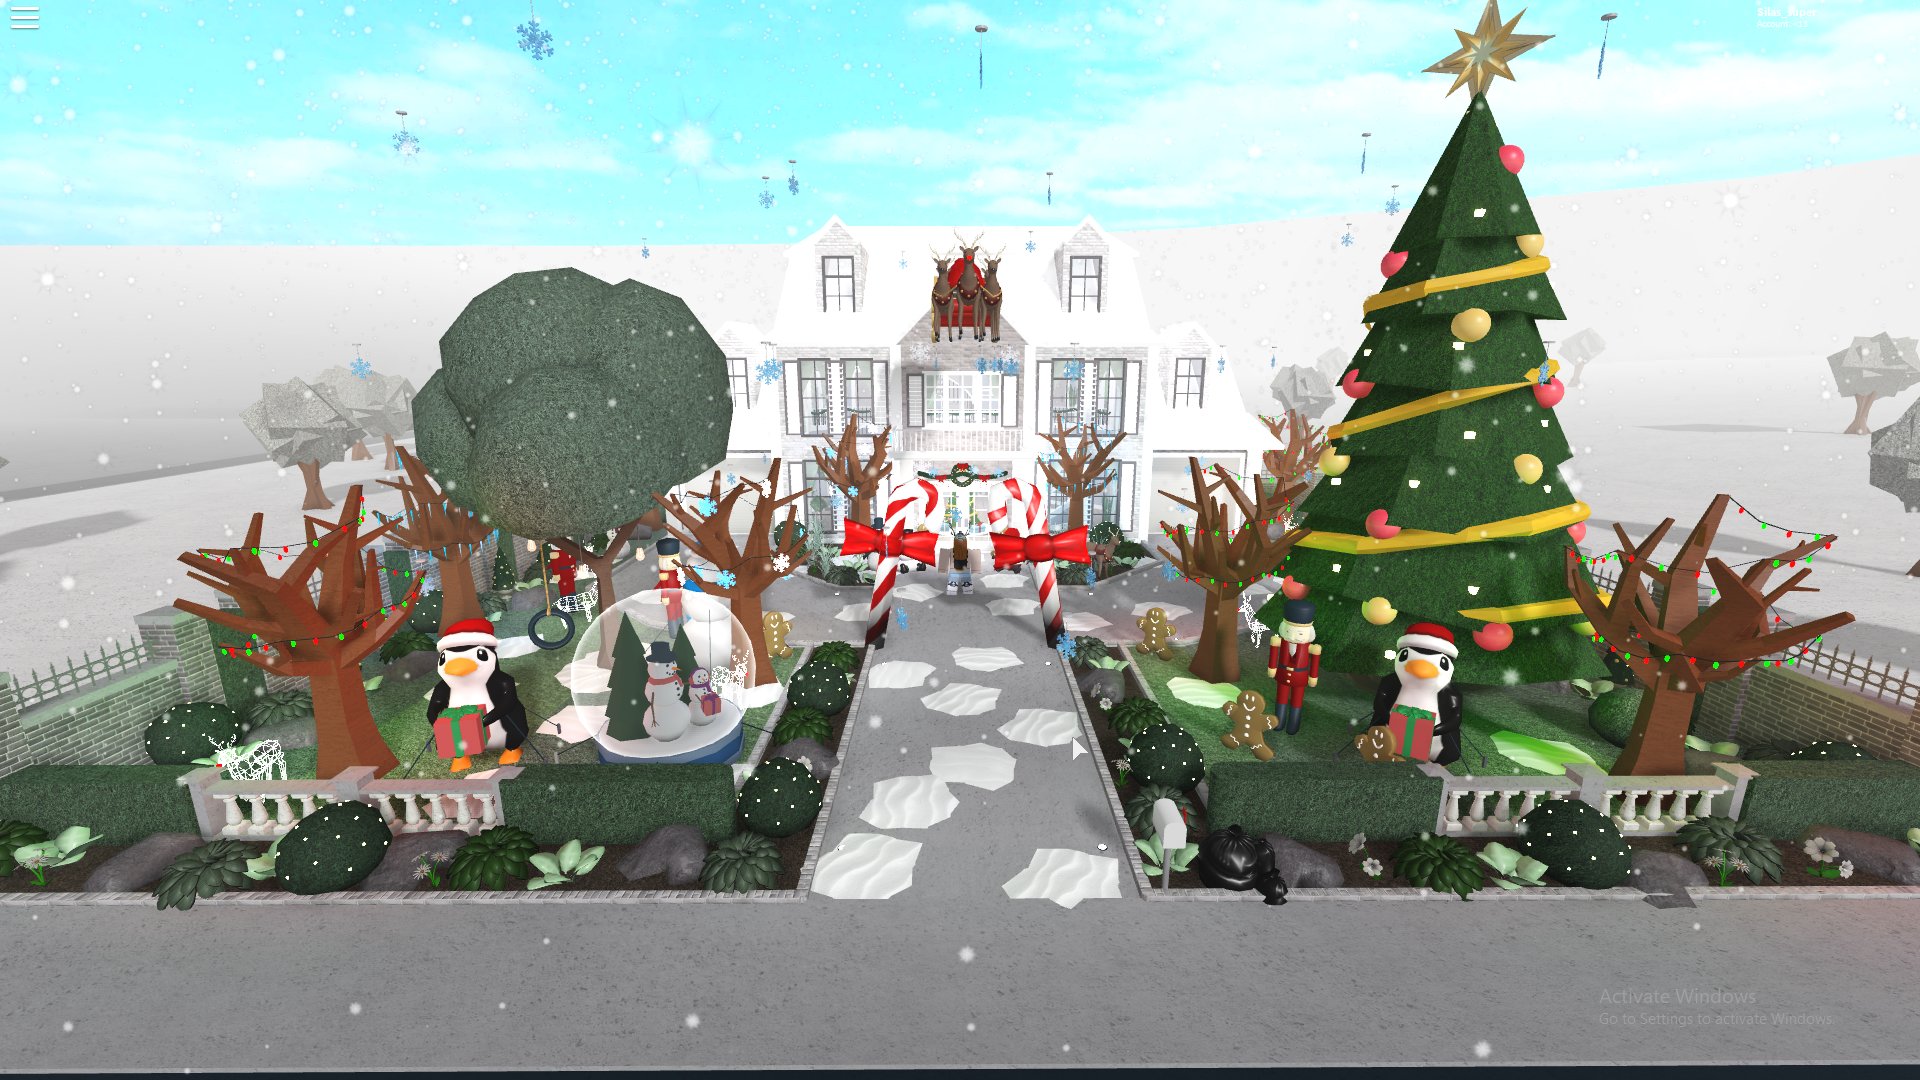 Silas Super Blm On Twitter I Freaked Out And Somehow Spent 30 On Christmas Decorations In About 8 Minutes I Dont Regret Doing This Rbx Coeptus Welcometobloxburg Bloxburgbuilds Bloxburgchristmas Xd Https T Co Q67k907vik - cristopheryt roblox at cristopheryt s twitter followings